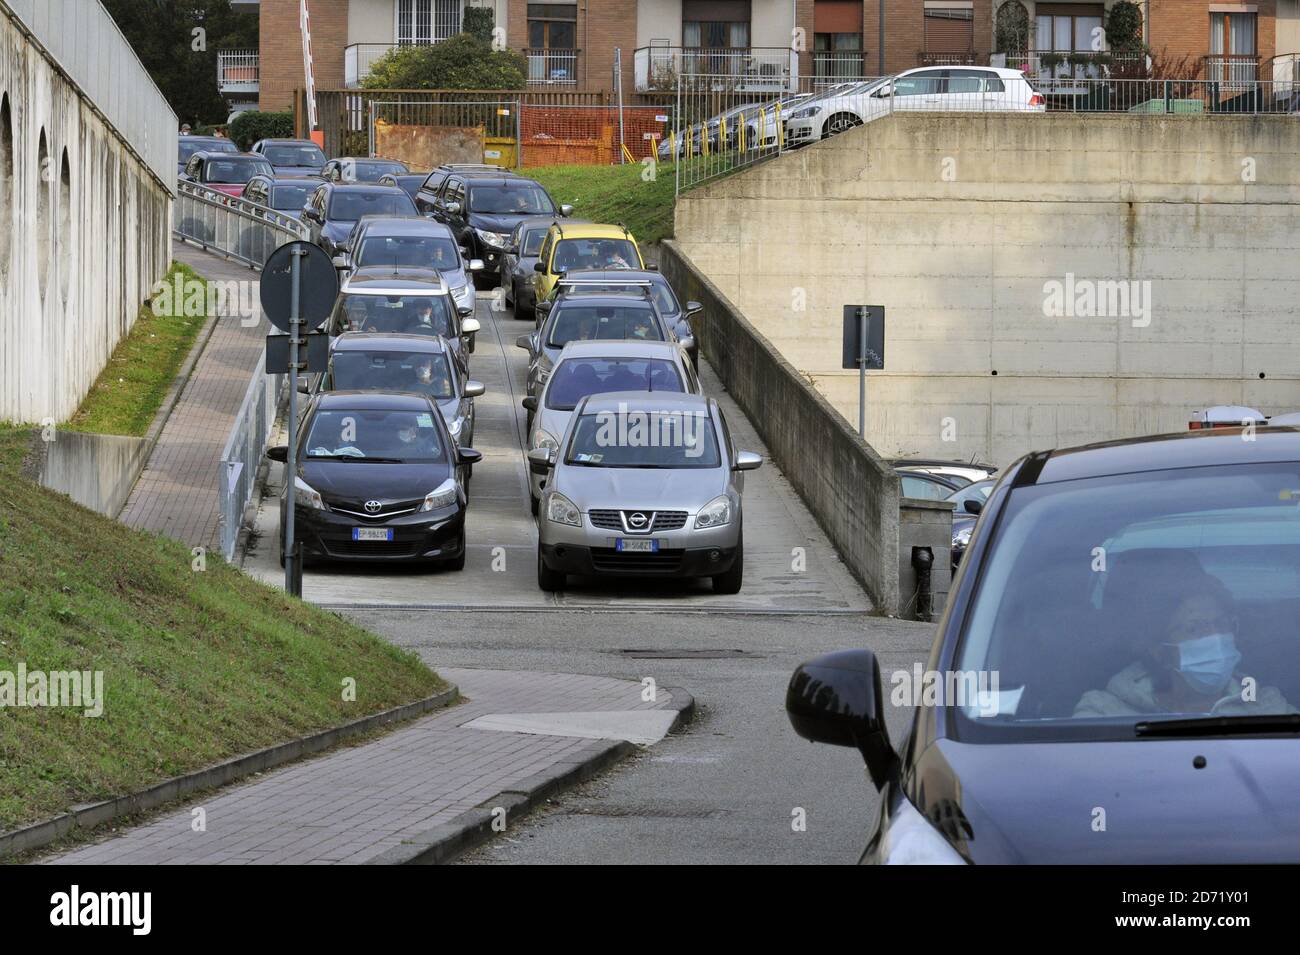 Milan (Italy), San Paolo hospital, in these days long car queues and many hours of waiting in all the hospitals that offer the 'drive through' service for picking up without getting out of car the nasopharyngeal swab  for the diagnosis of  Covid-19 virus infection. Stock Photo